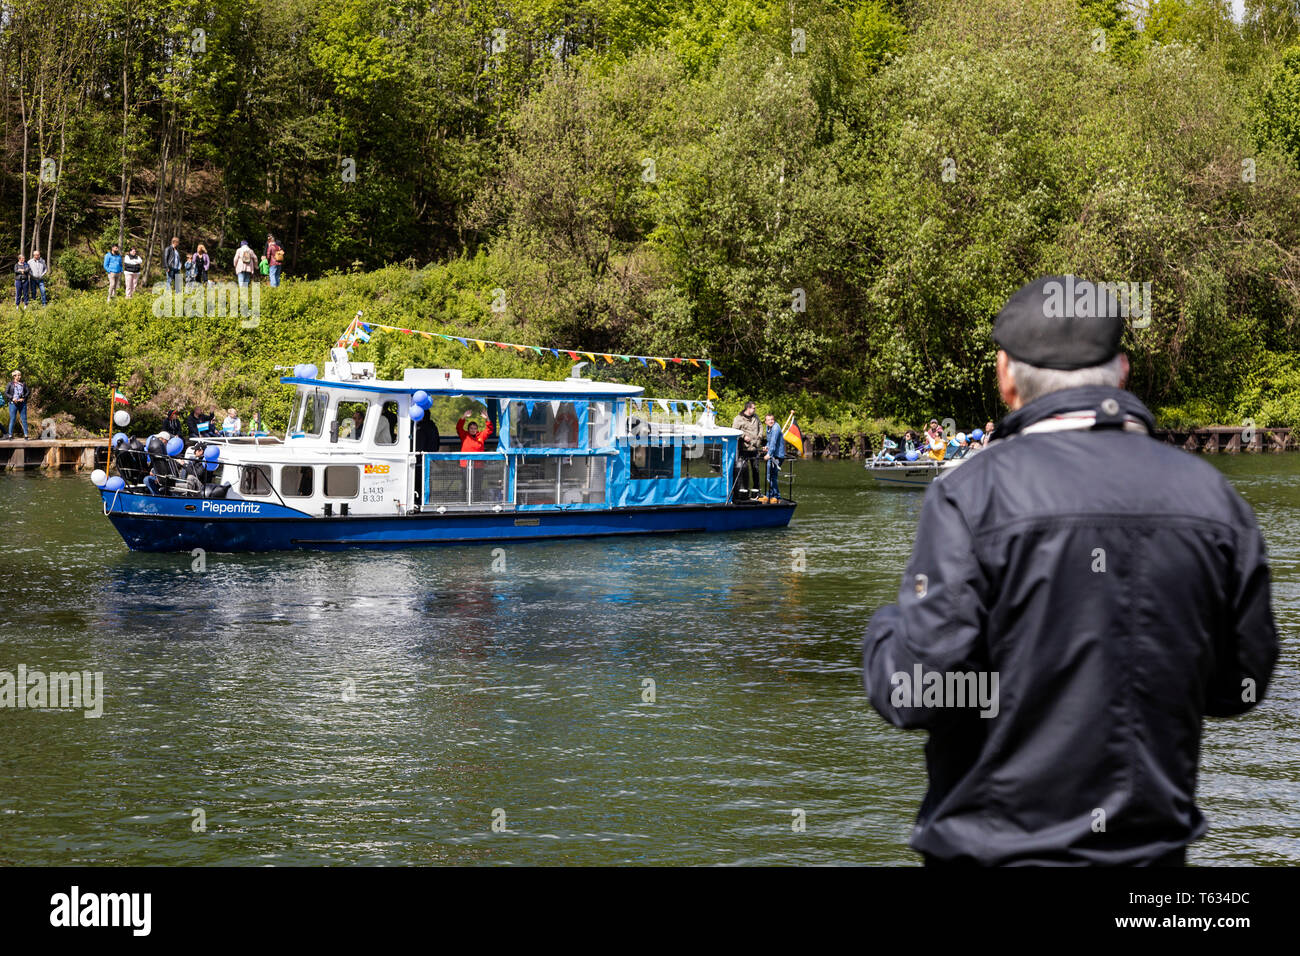 Gelsenkirchen, Germany. 28 April 2019. The KulturKanal ship parade takes place on  Rhine–Herne Canal (Rhein-Herne-Kanal) at Nordsternpark. Stock Photo